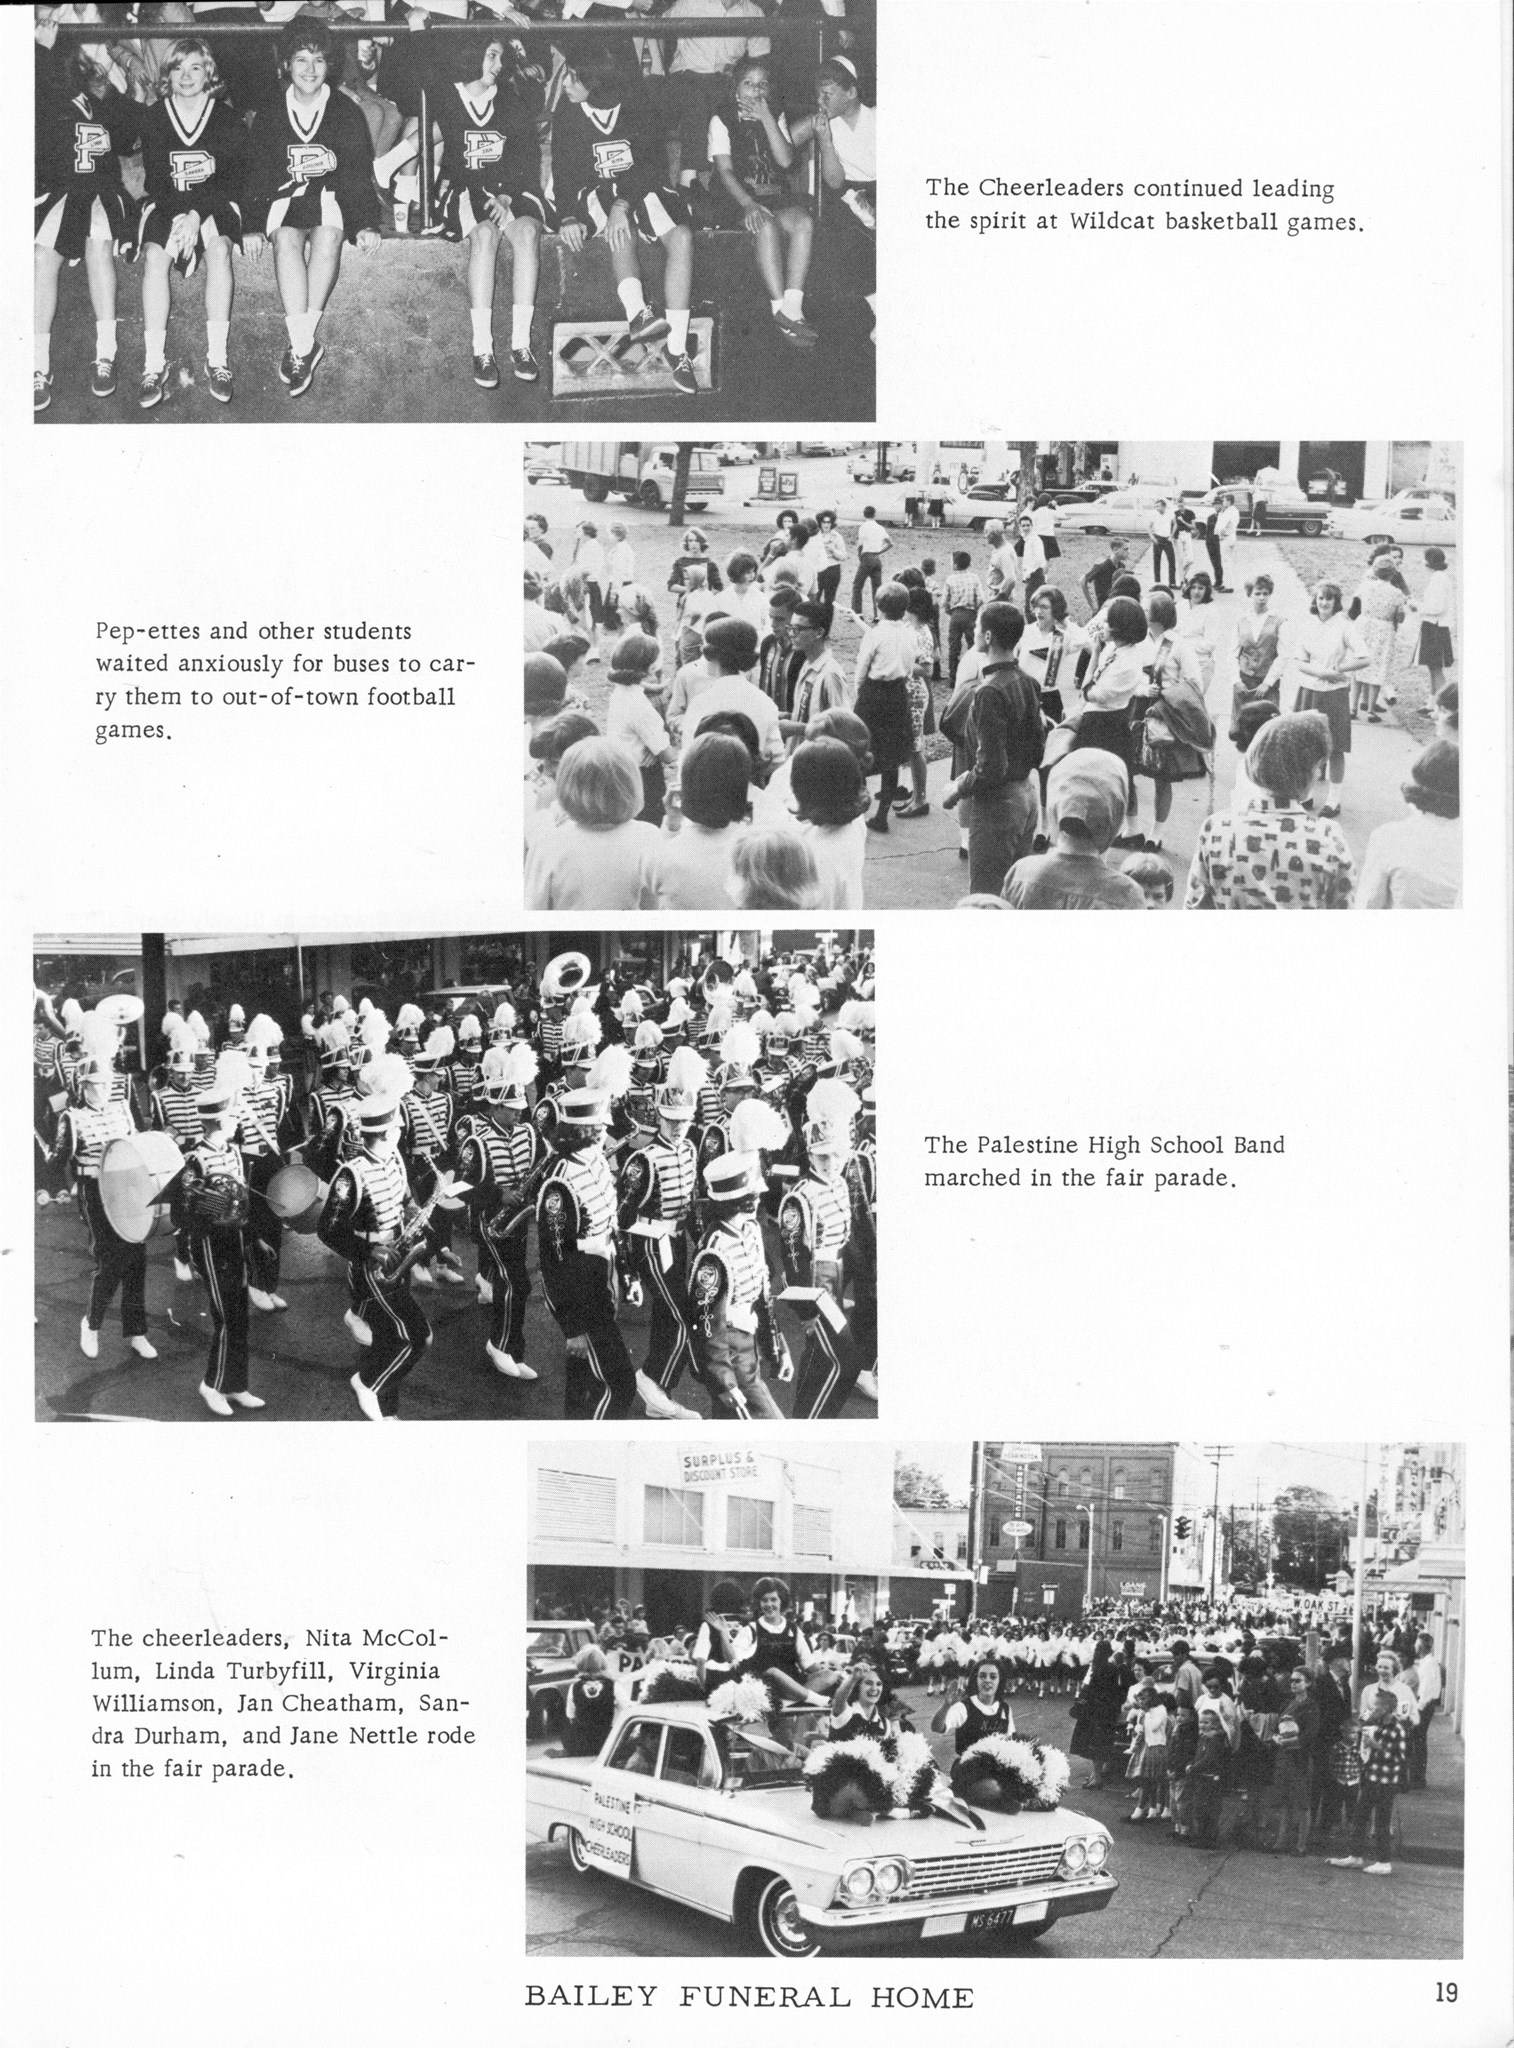 ../../../Images/Large/1965/Arclight-1965-pg0019.jpg